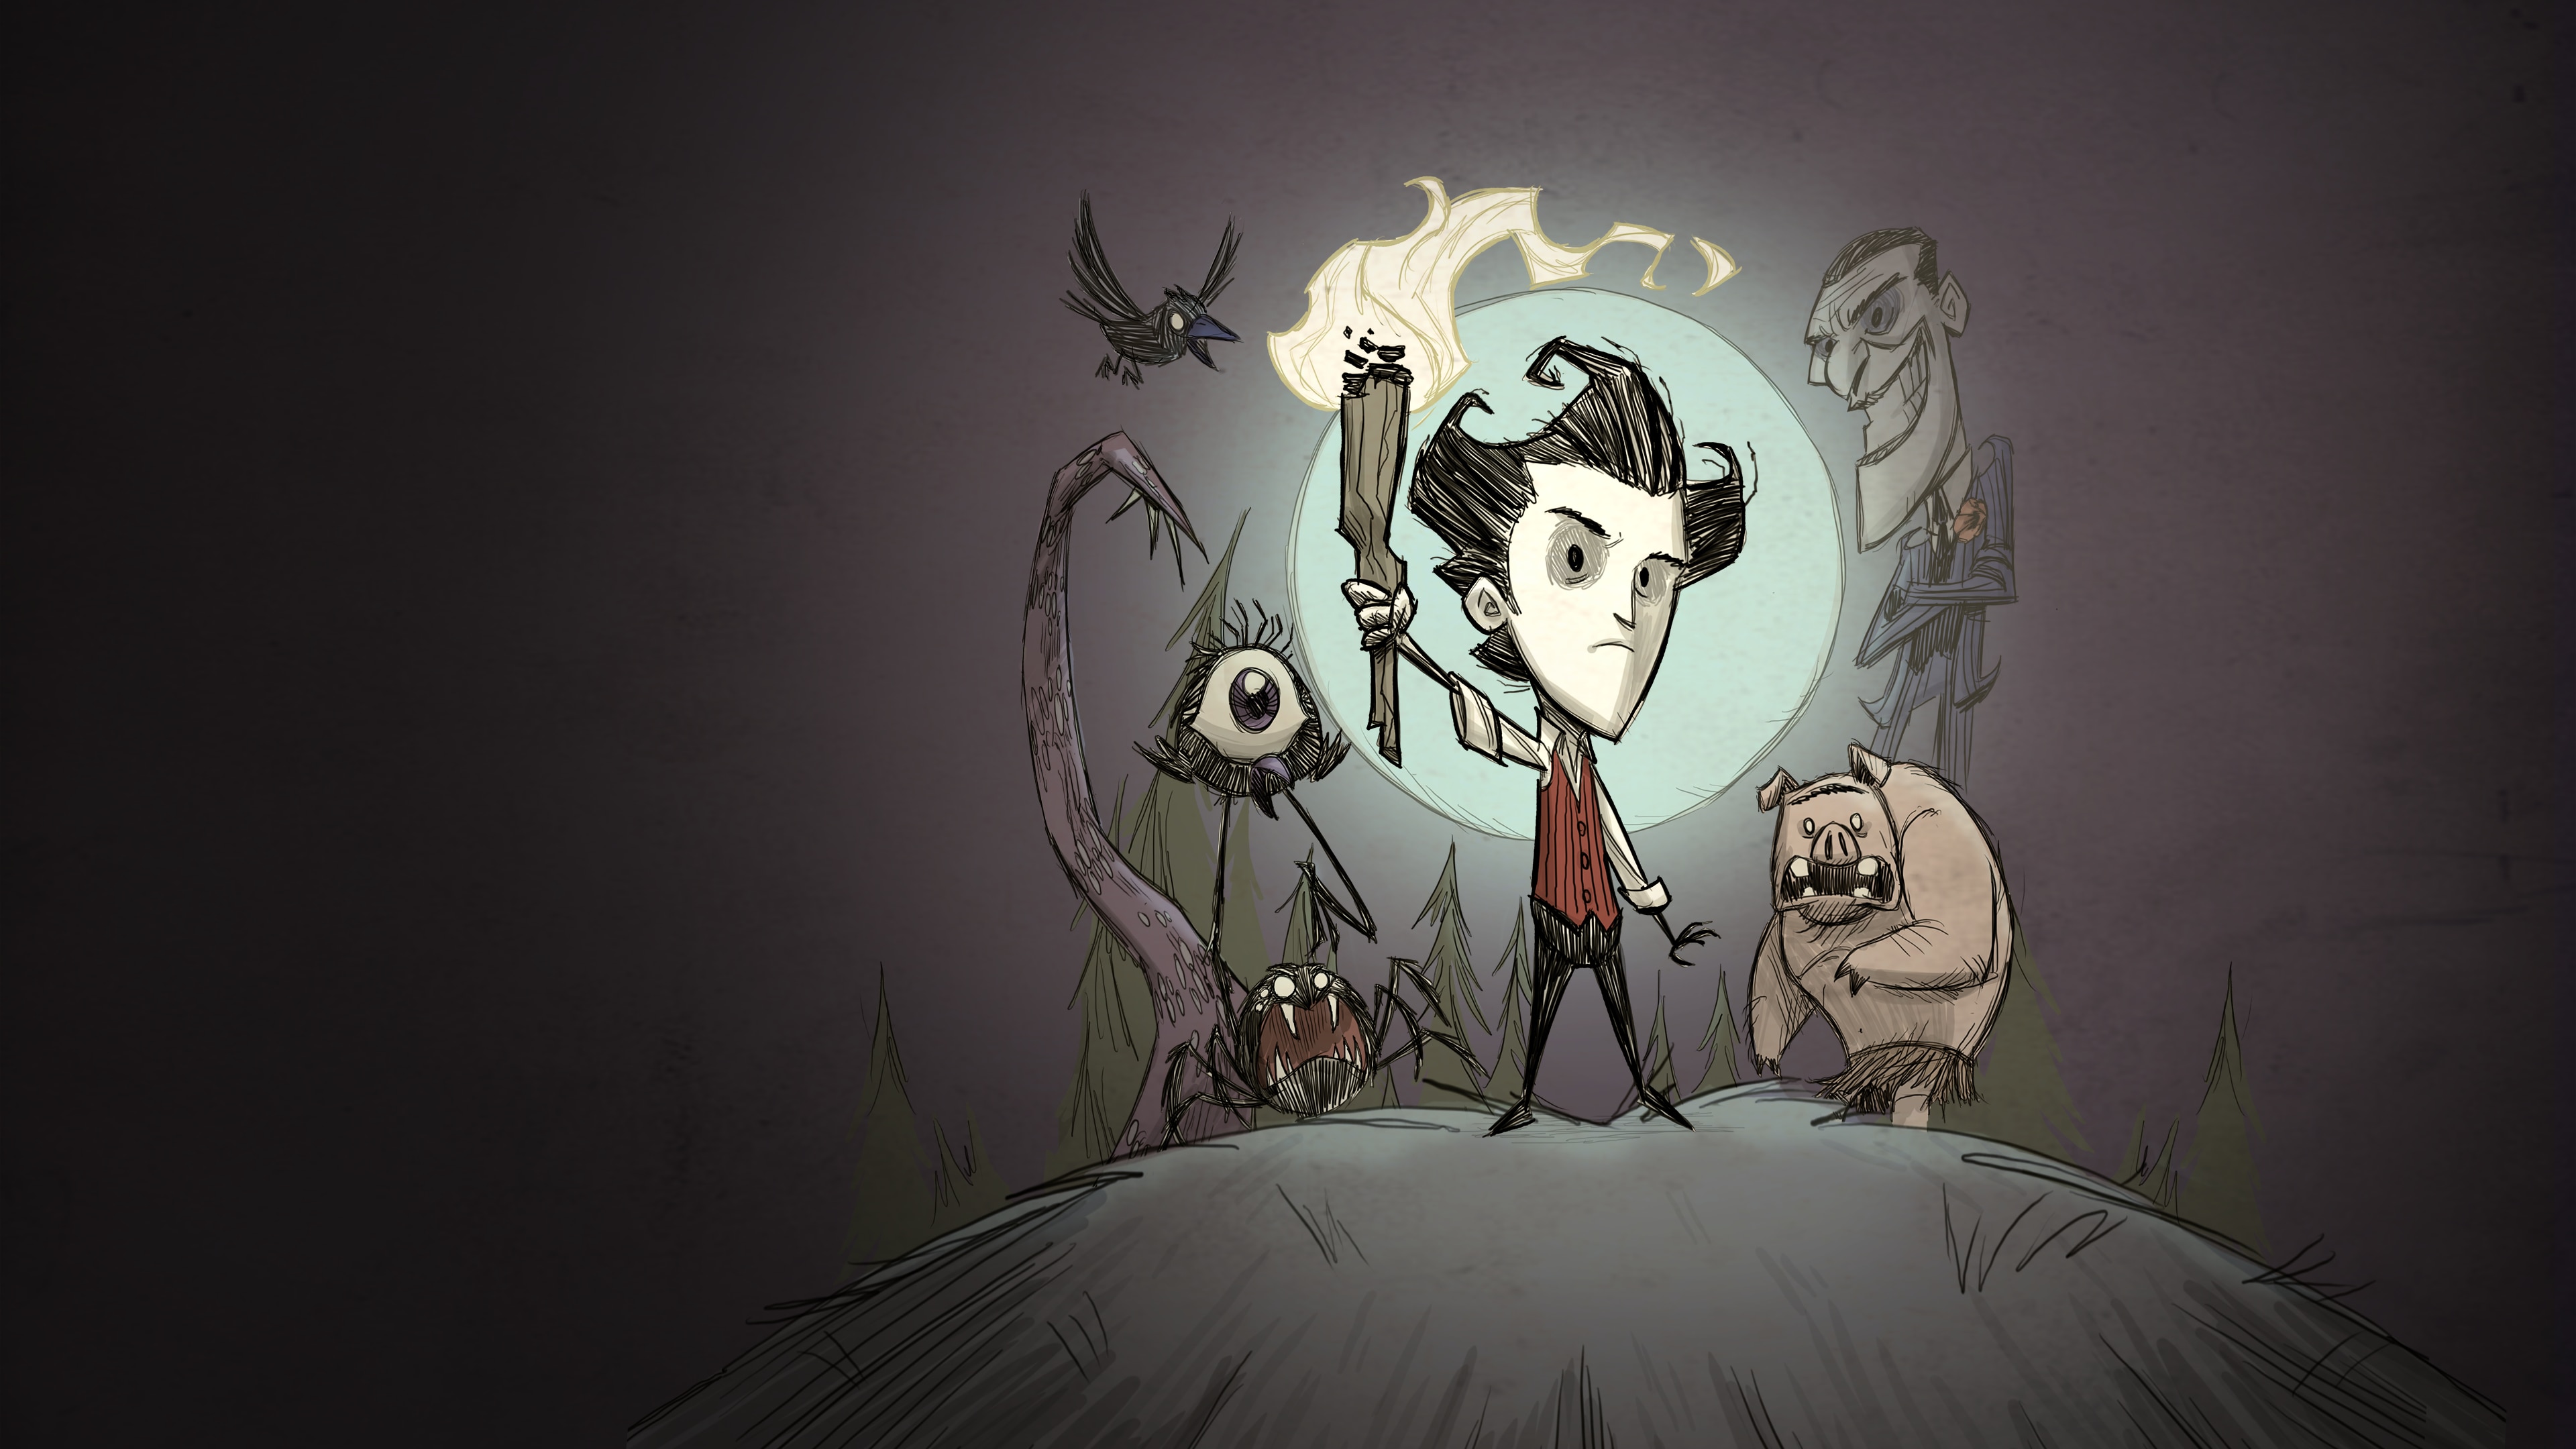 There are far more images available for Don't Starve: Console Edition